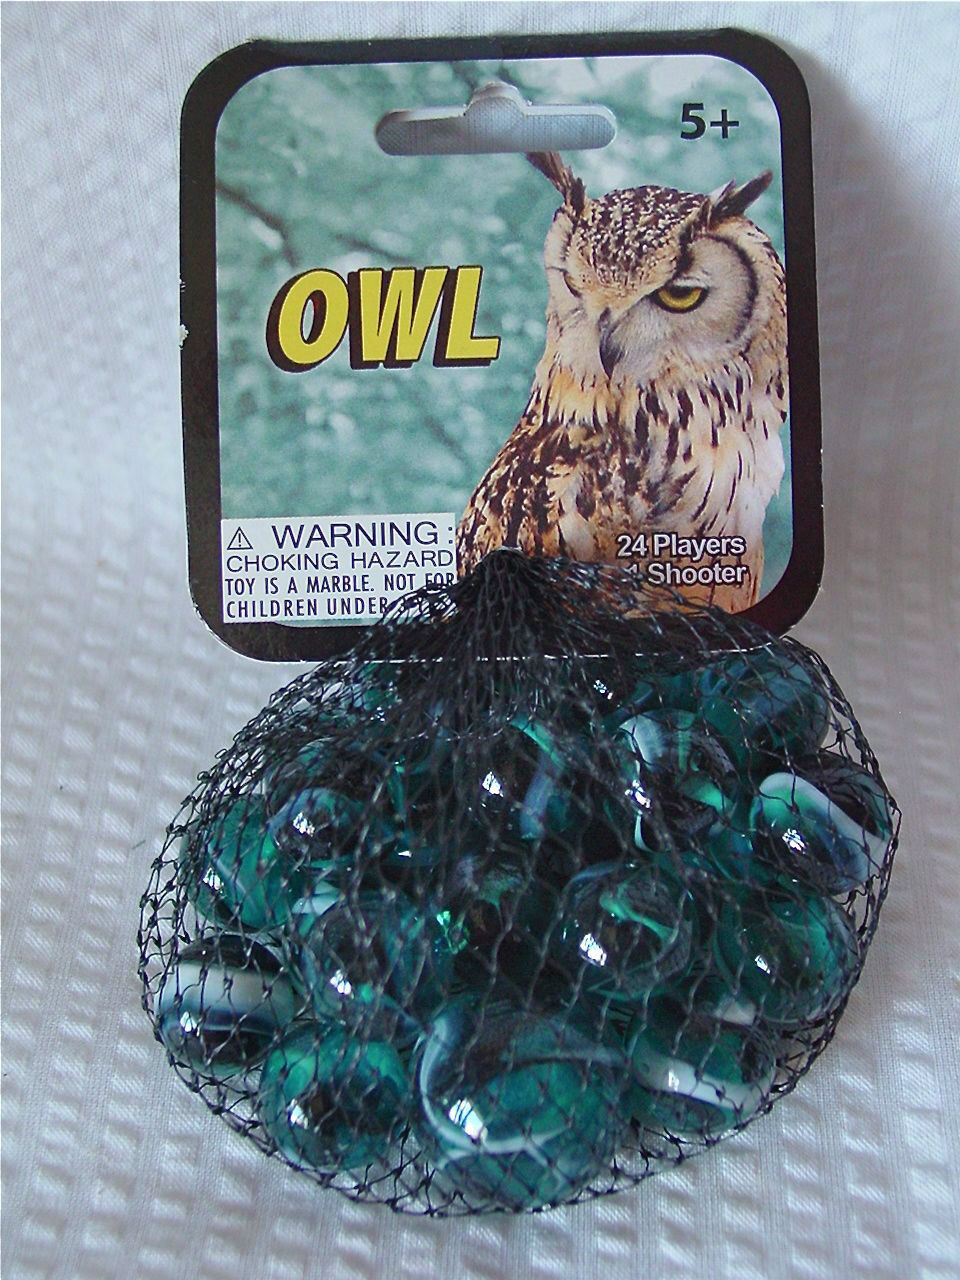 OWL- Net Bag Of 24 Player Mega Marbles & 1 Shooter-Instructions & Facts